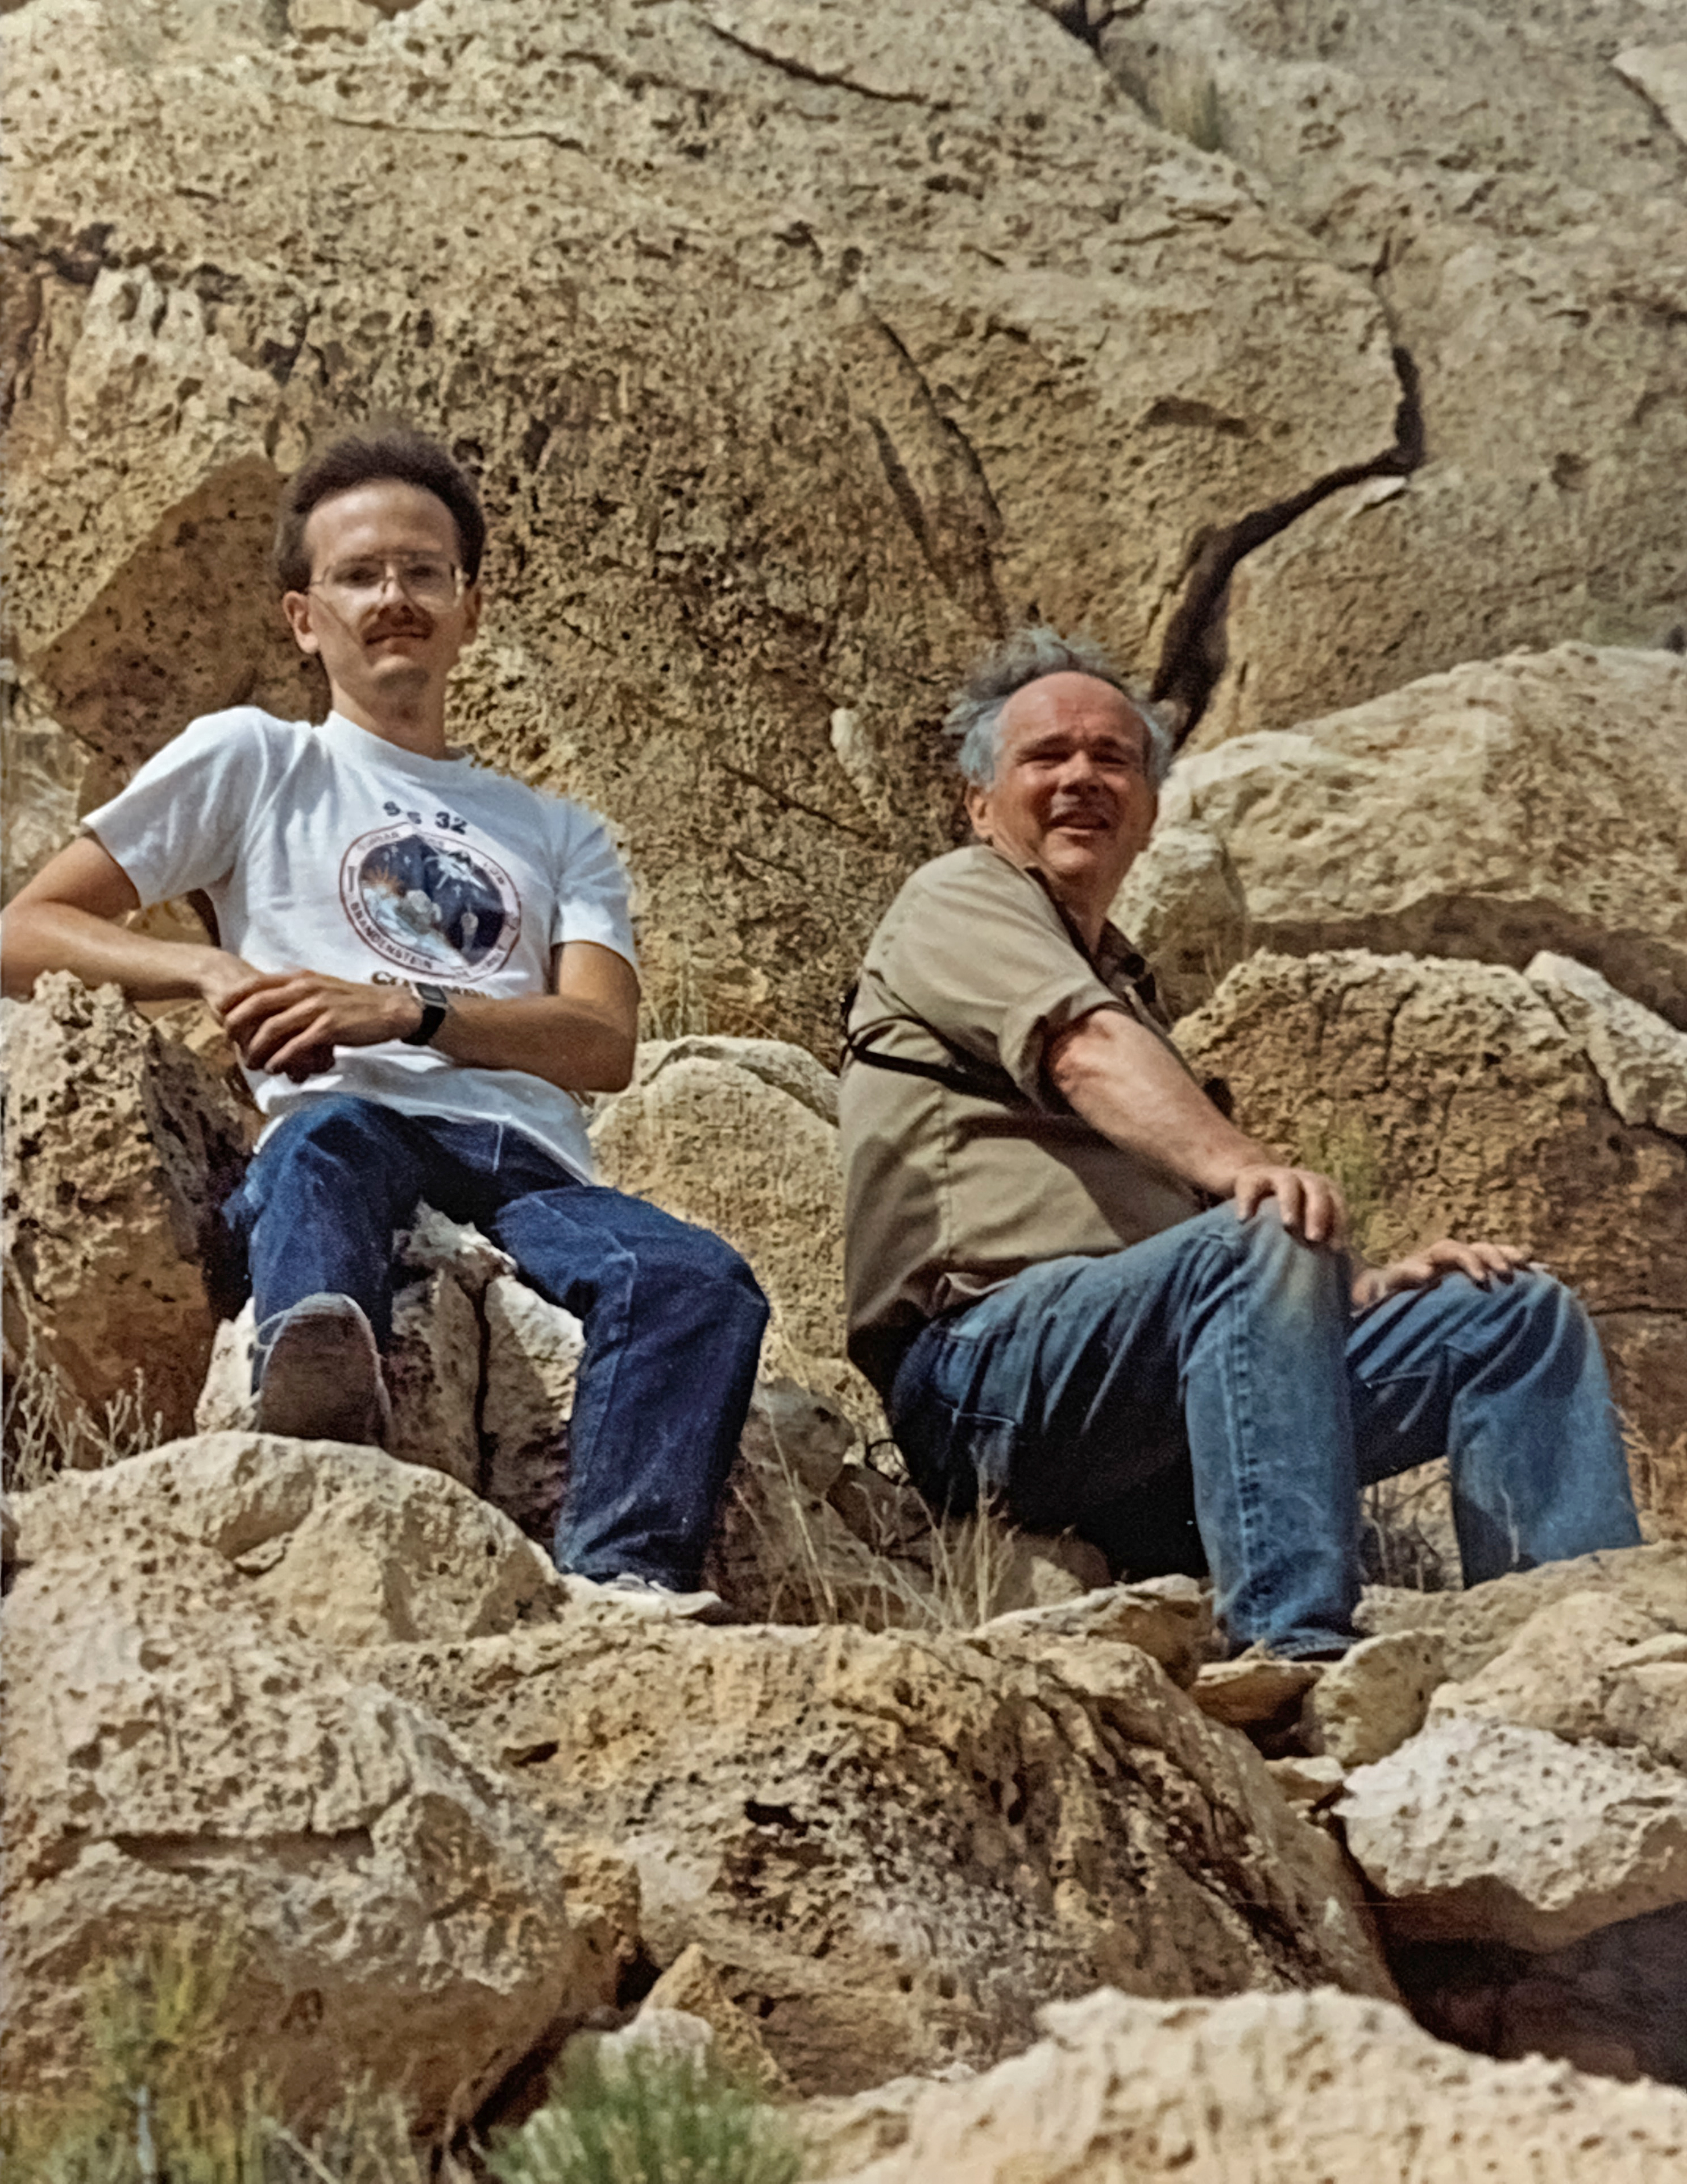 Astrogeologist Gene Shoemaker at Meteor Crater with Apollo astronauts during a field trip in May 1967.